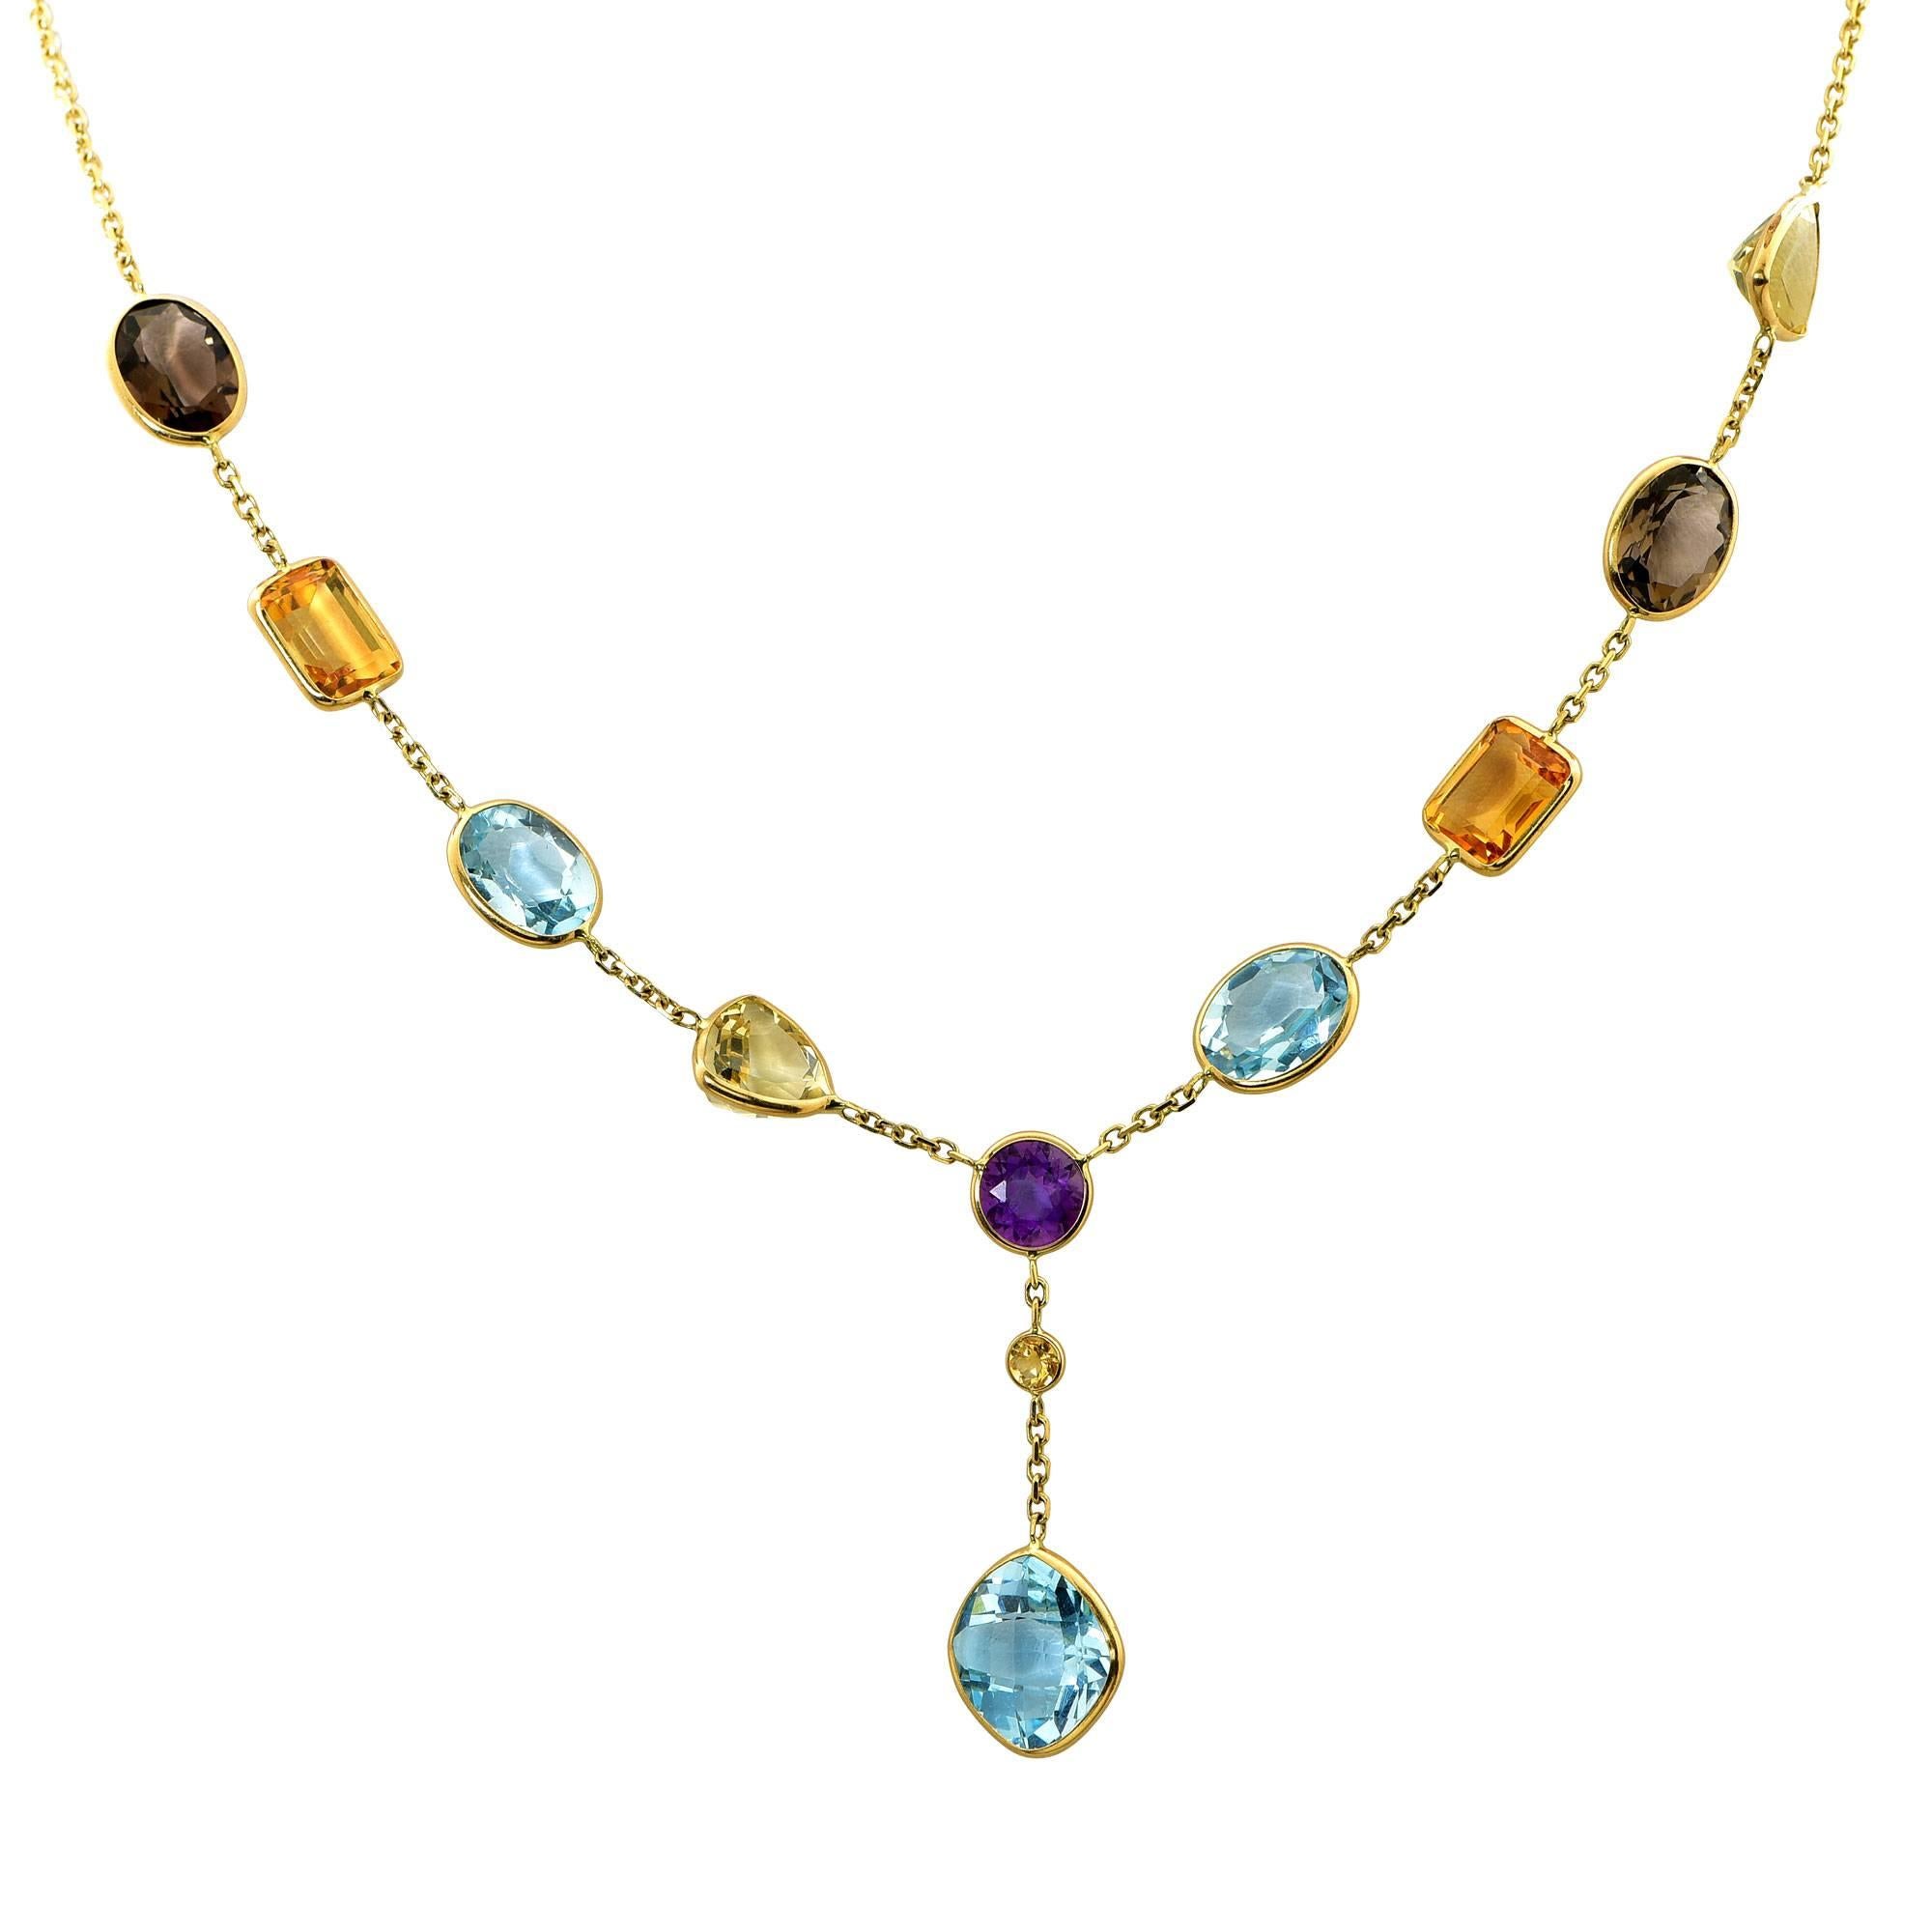 14k yellow gold lariat style necklace containing 10 mixed color semi-precious gemstones.

It is stamped and/or tested as 14k gold.
The metal weight is 6.91 grams.

This necklace is accompanied by a retail appraisal performed by a GIA Graduate